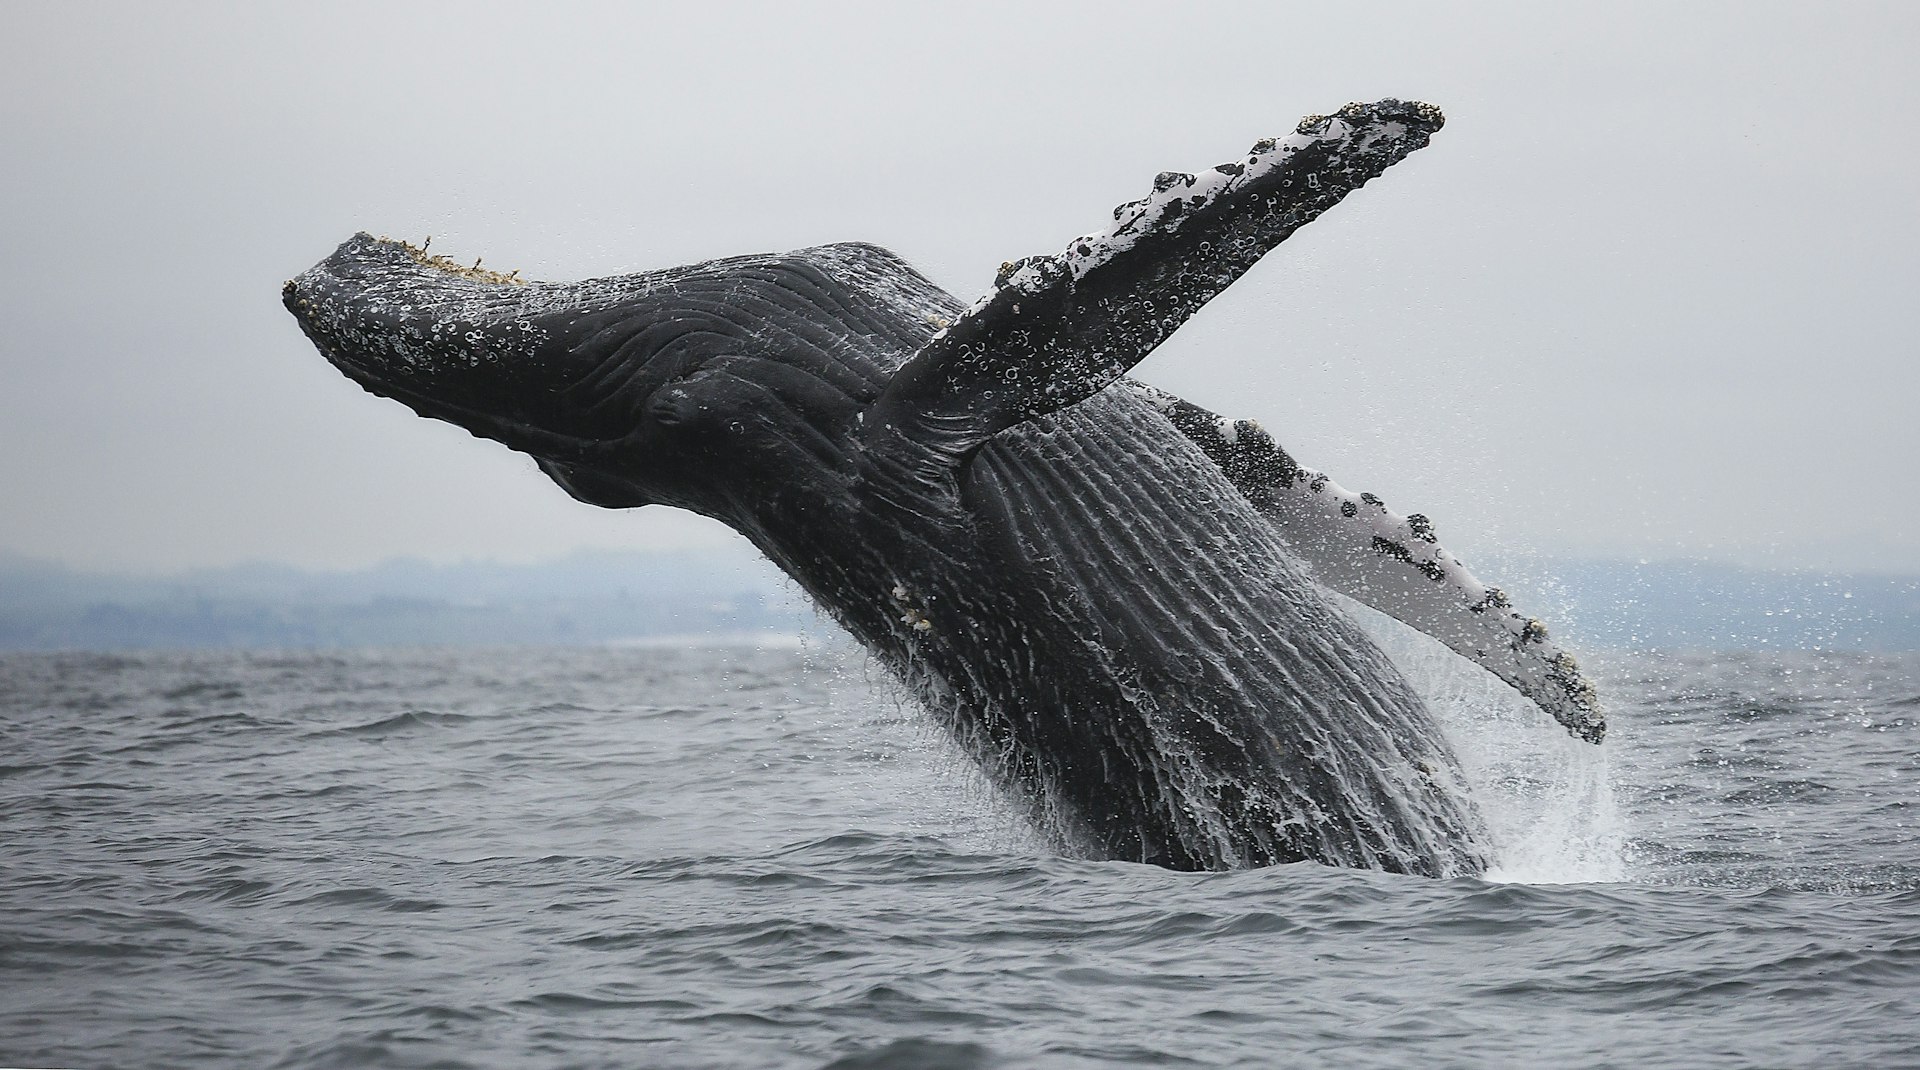 A humpback whale breaches out of the water off the California coast